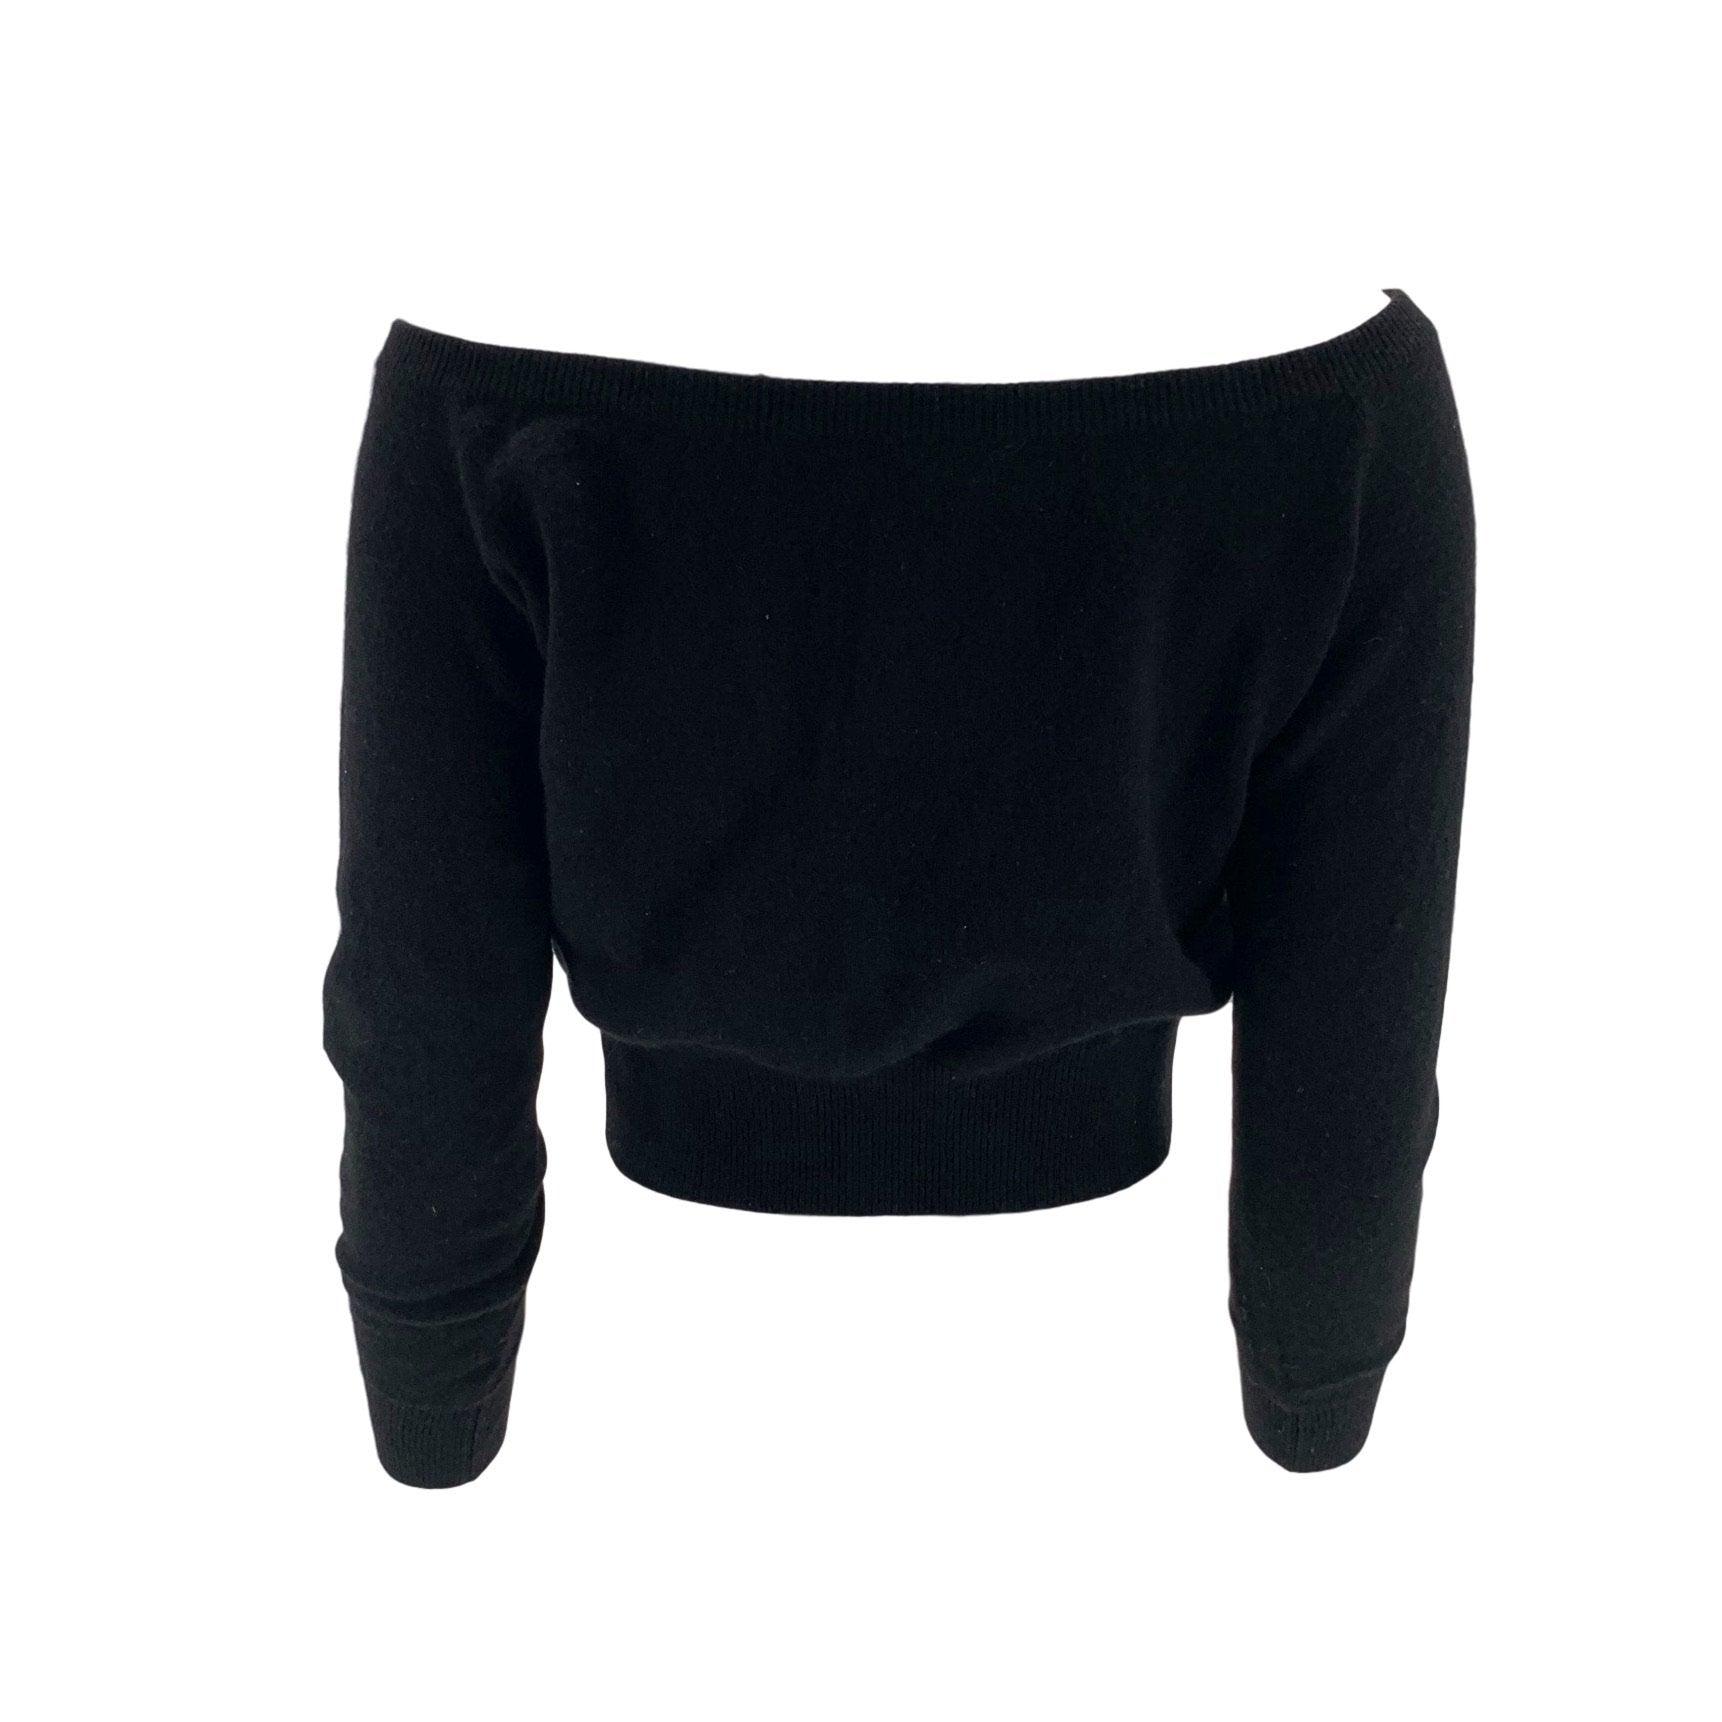 Chanel Black Cashmere Cropped Bow Top